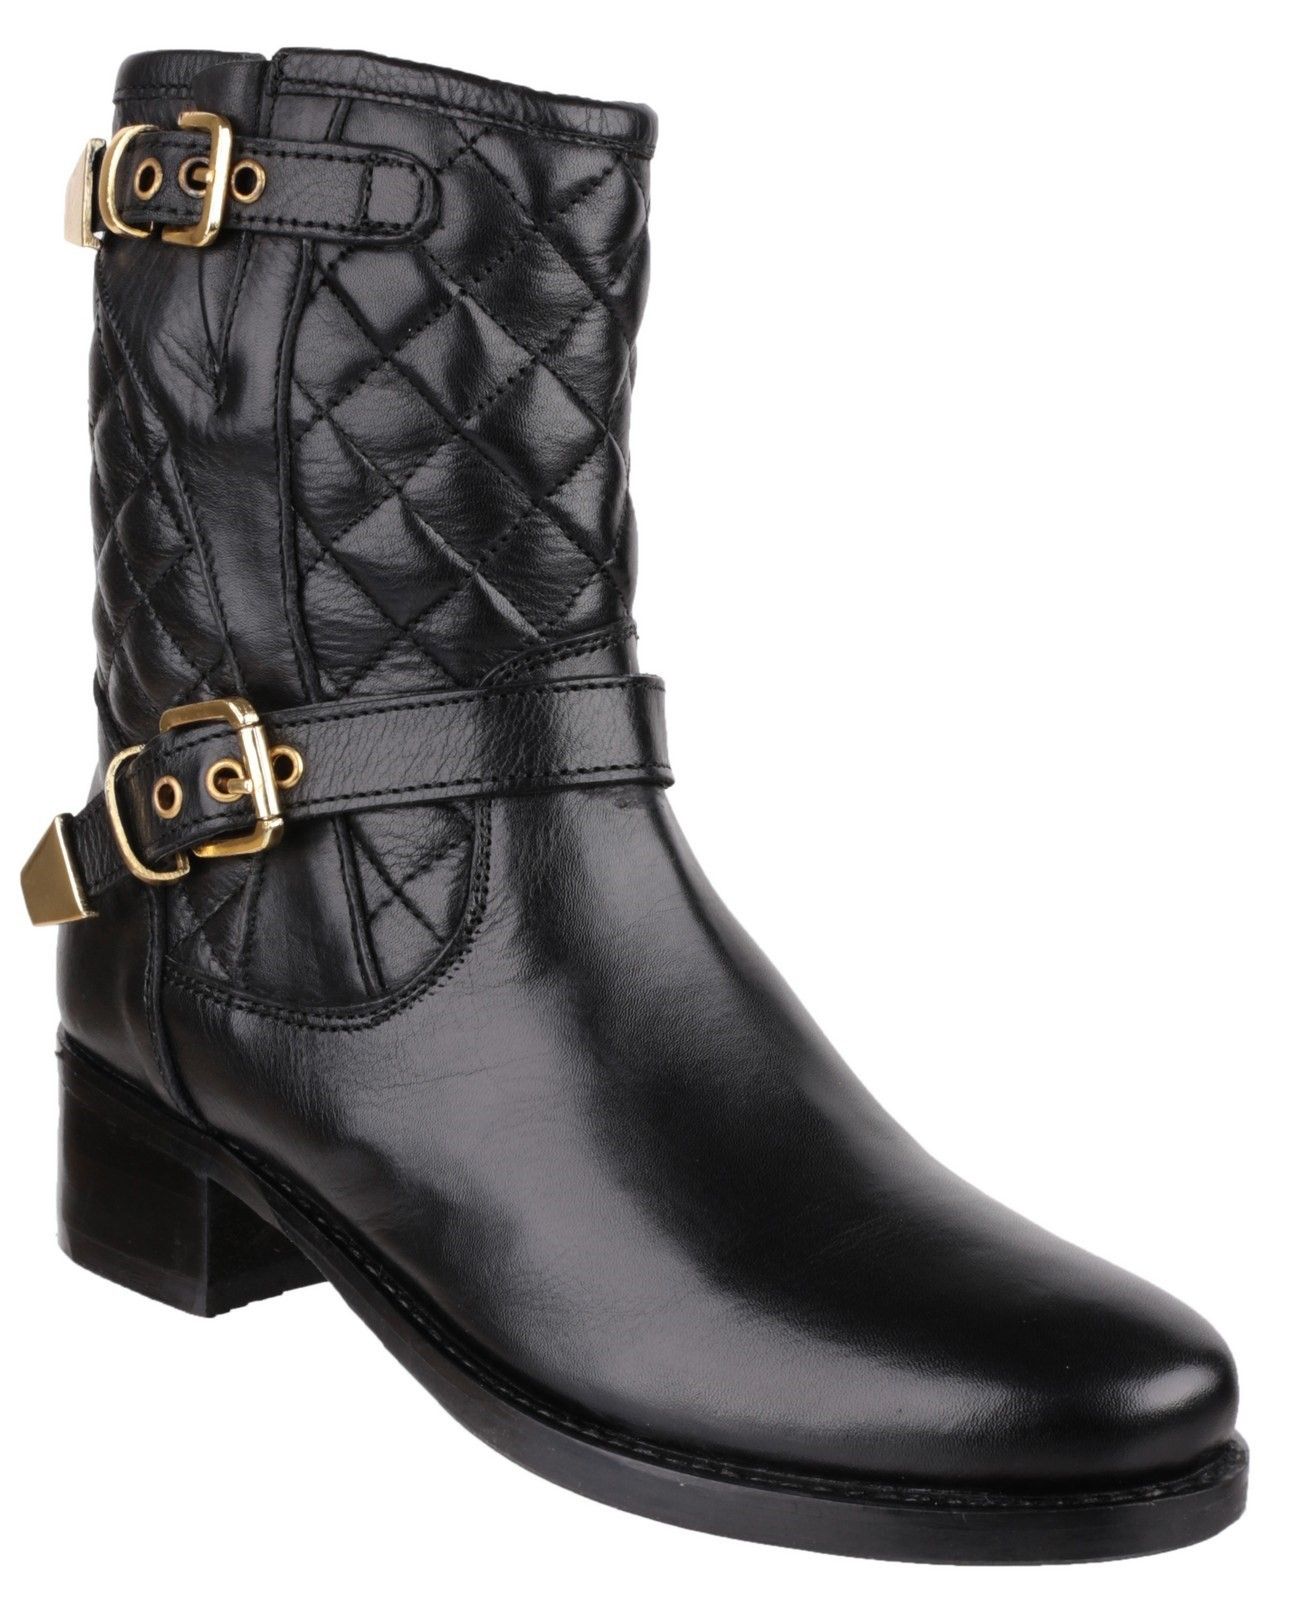 Ladies quilted boot with comfortable leather upper and twin buckle features.Elegy ladies quilted leather dress ankle boot. 
Stylish ladies dress ankle boot with quilted leather detailing around the ankle and twin buckle trim. 
The top buckle allows for some fit adjustment around the ankle and there is also a full inside zip for easy on and off.